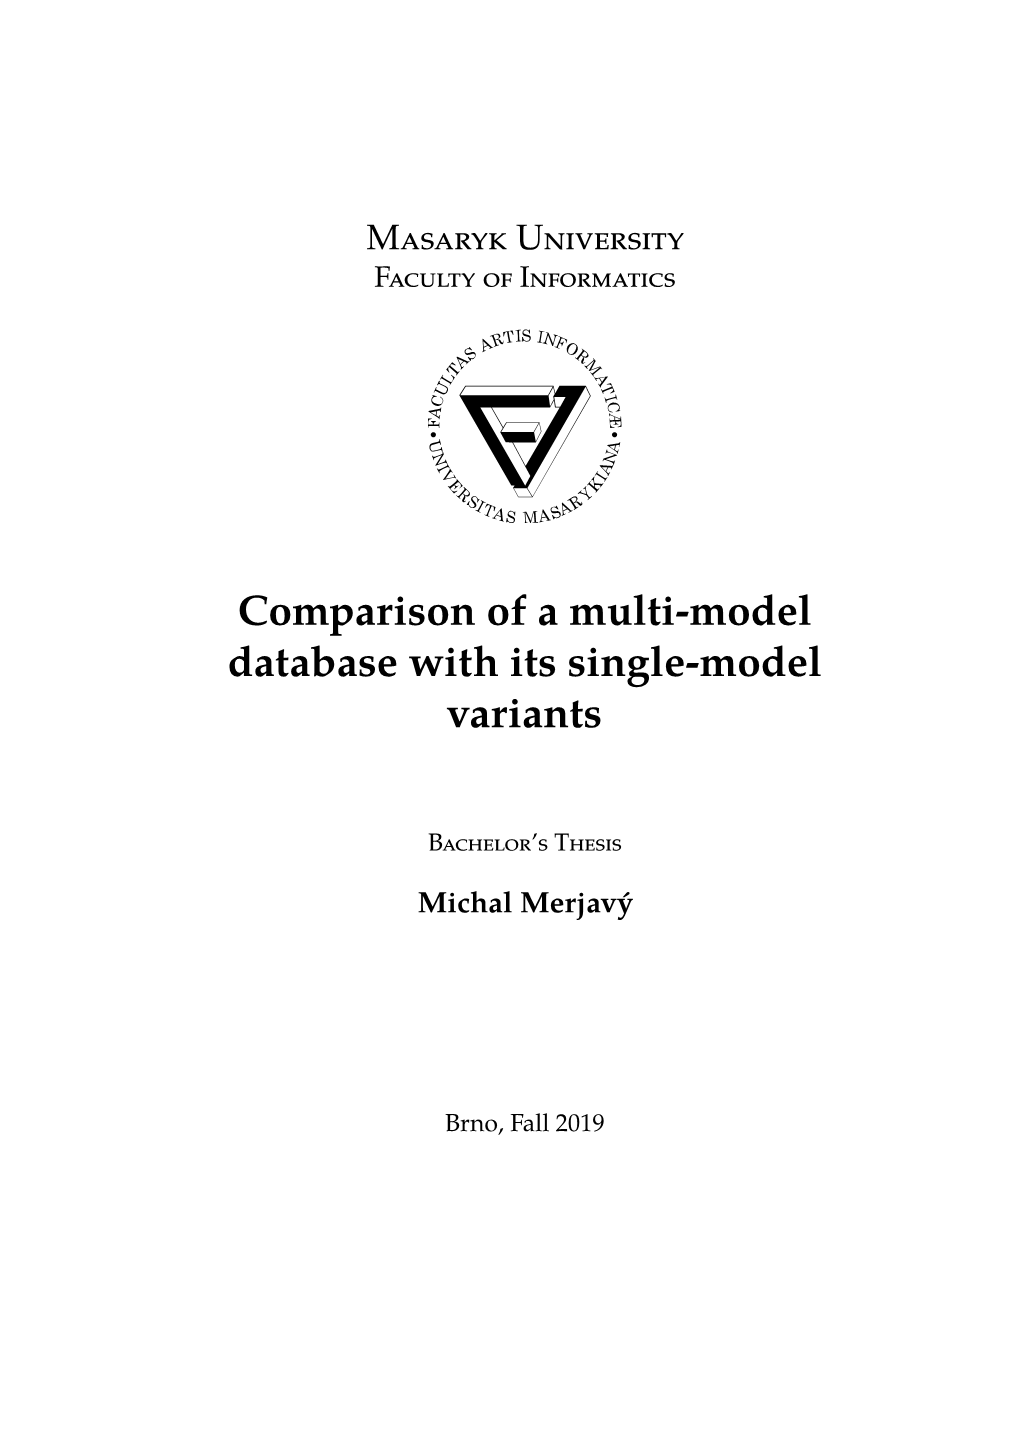 Comparison of a Multi-Model Database with Its Single-Model Variants